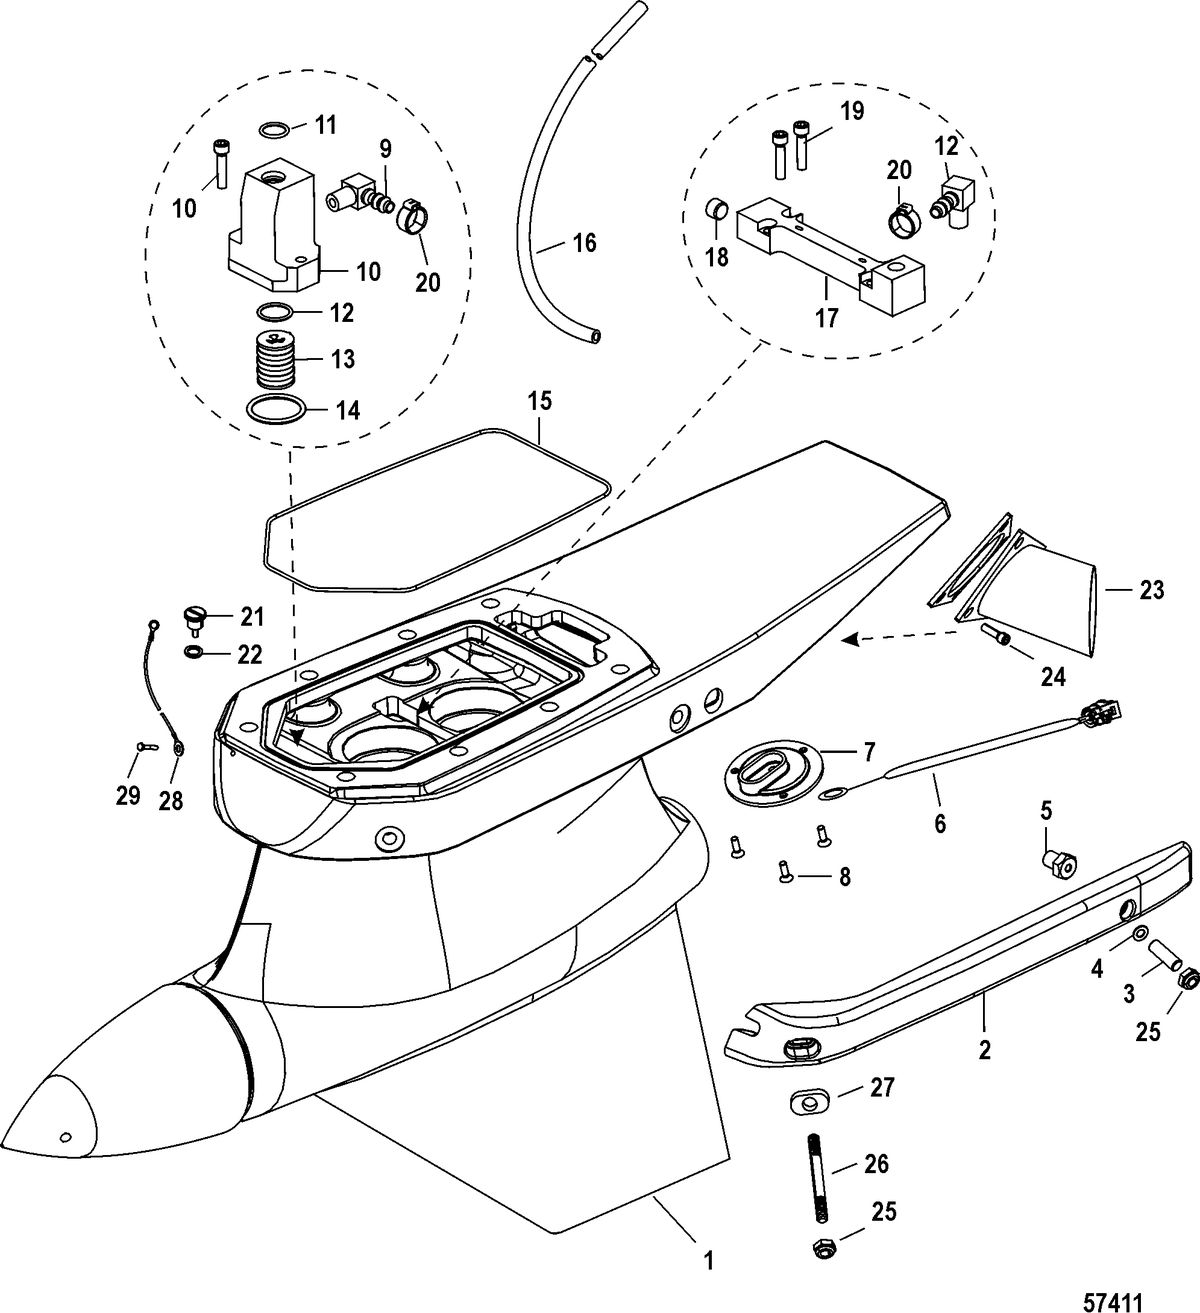 RACE STERNDRIVE M8 DRIVE AND M SERIES TRANSOM Gear Housing Assembly(0M971211 and Below)